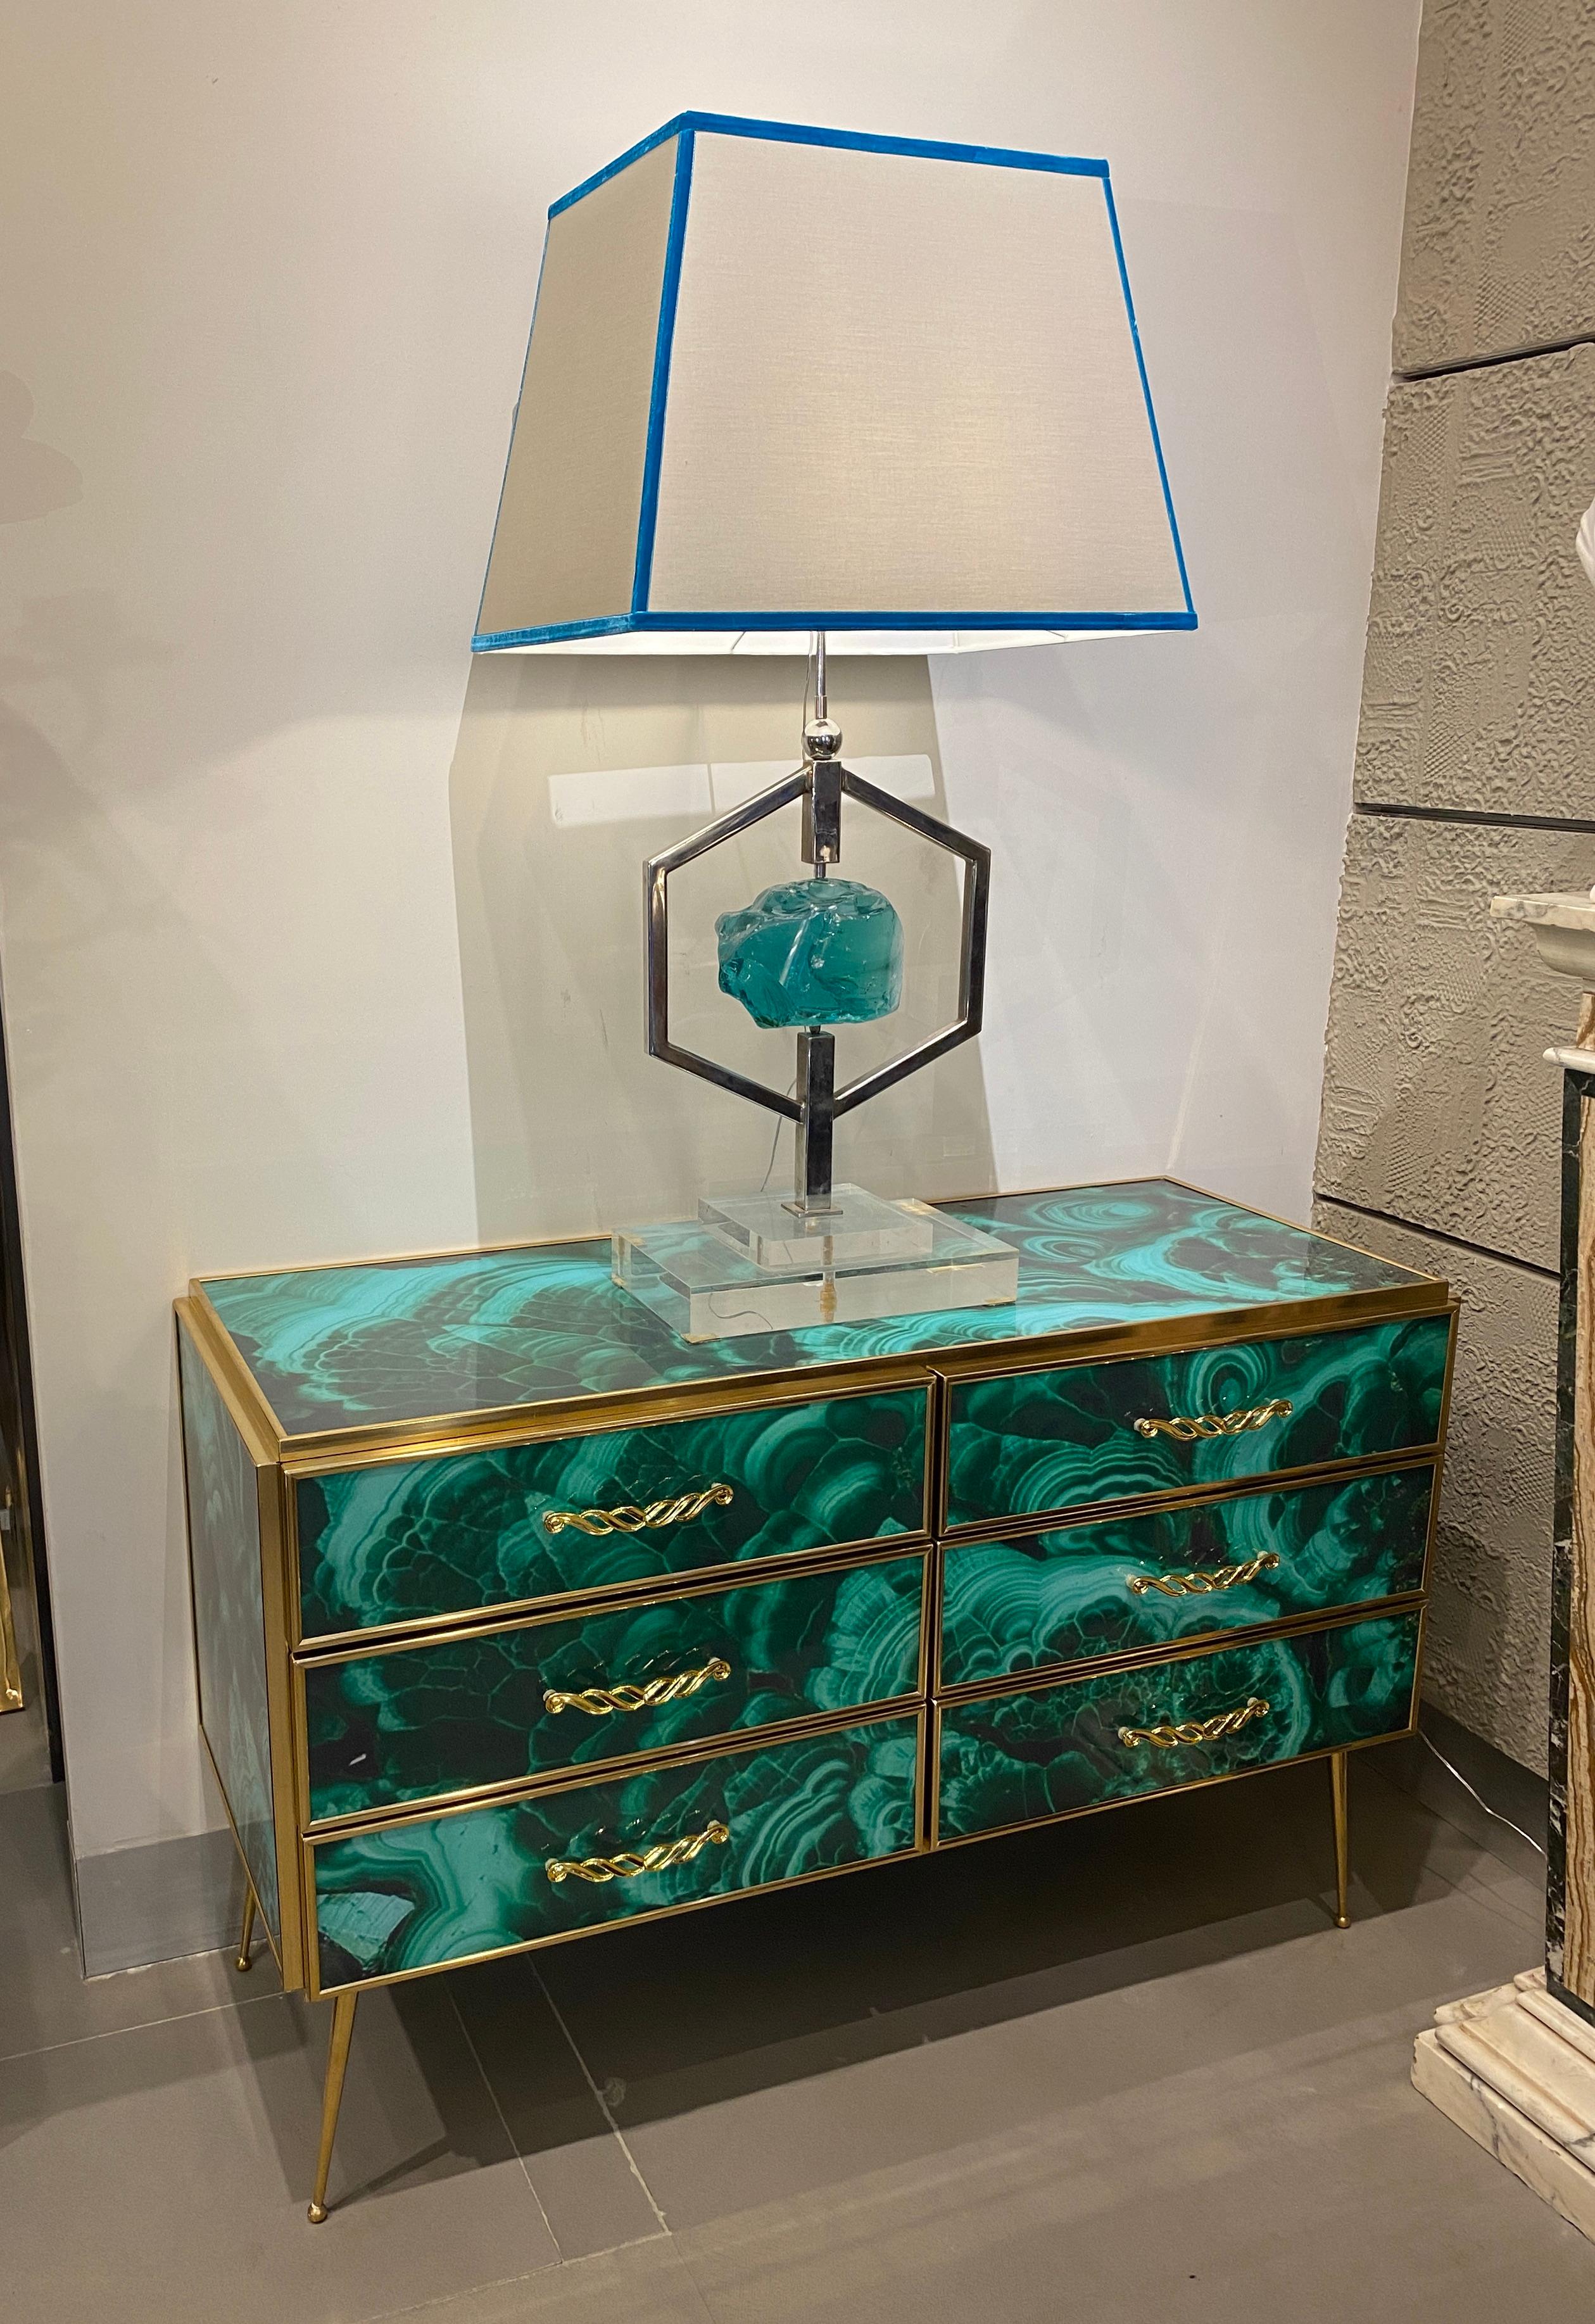 Striking brass frame and hand-cut Malachite imitation Murano glass Commode or chest of drawer, raised on special brass legs. 
Handmade by a master artisan.
Price is for 1 item .
We will deliver professionally packed in a wooden case. 